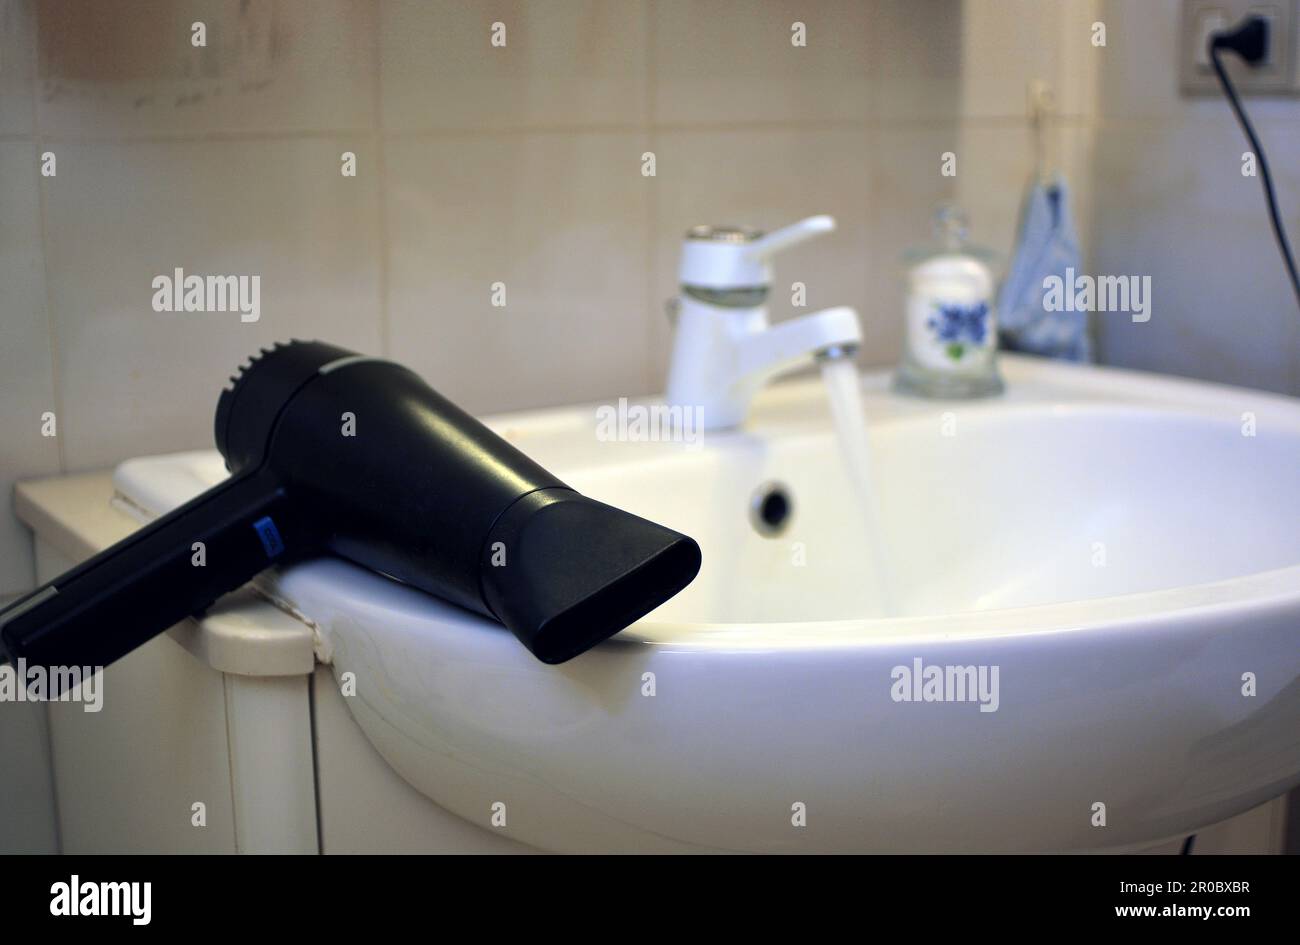 Domestic accidents, shock hazard with electricity and water Stock Photo